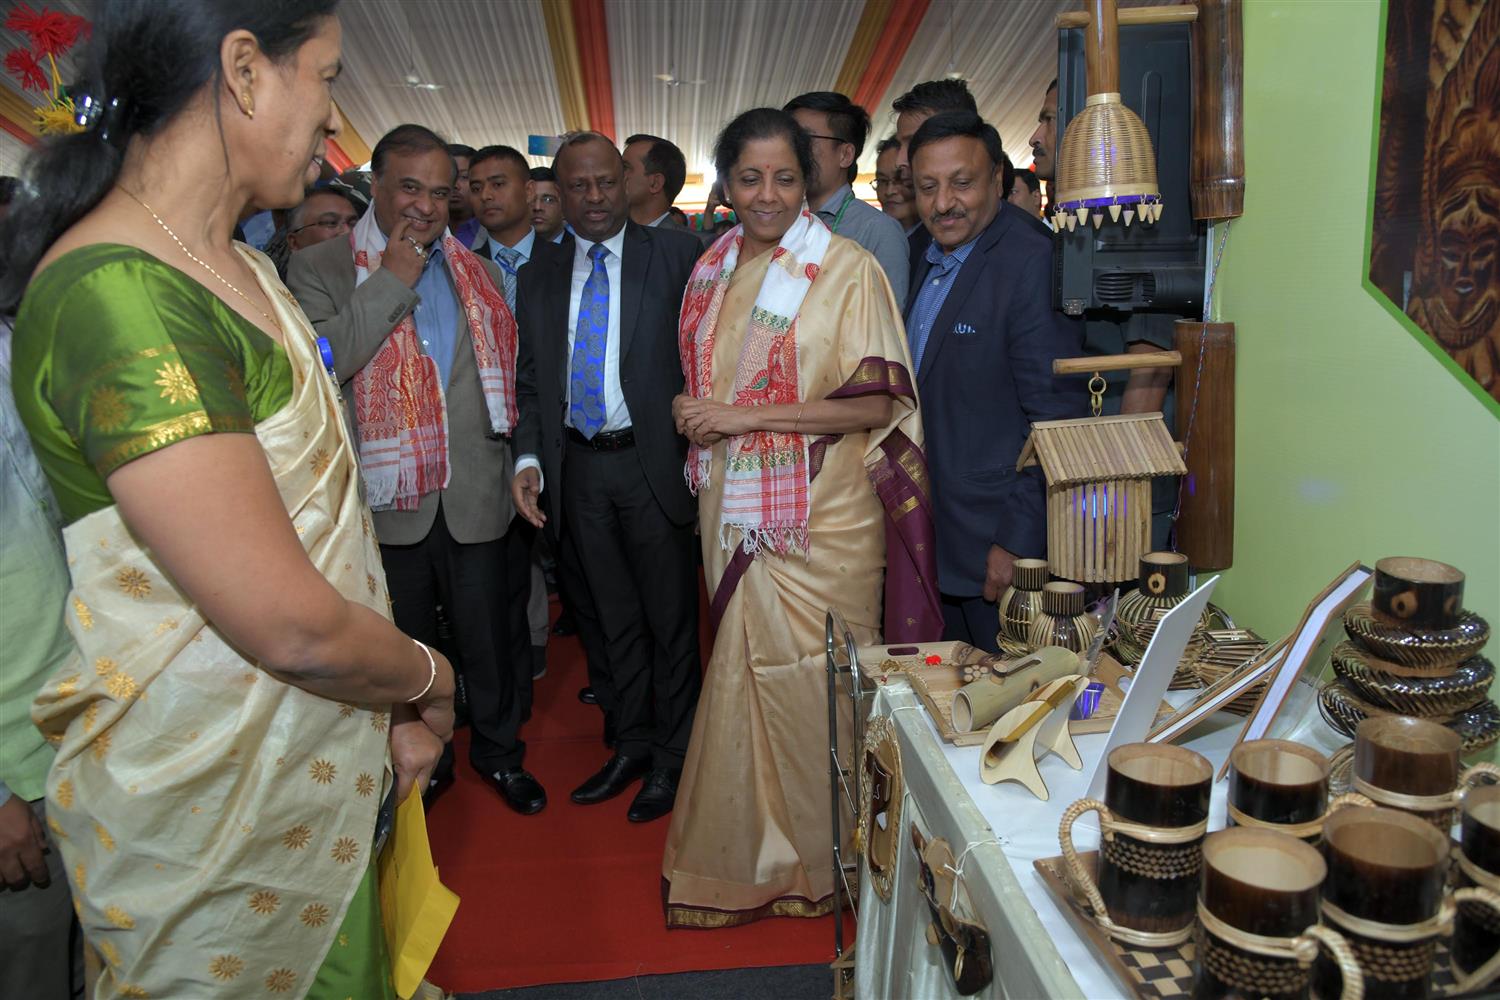 Union Minister of Finance & Corporate Affairs Smt. Nirmala Sitharaman, visiting the exhibition stalls put up by  NGOs at the venue of Bankers meets  at  Khanapara, Guwahati on 27th February 2020. 

